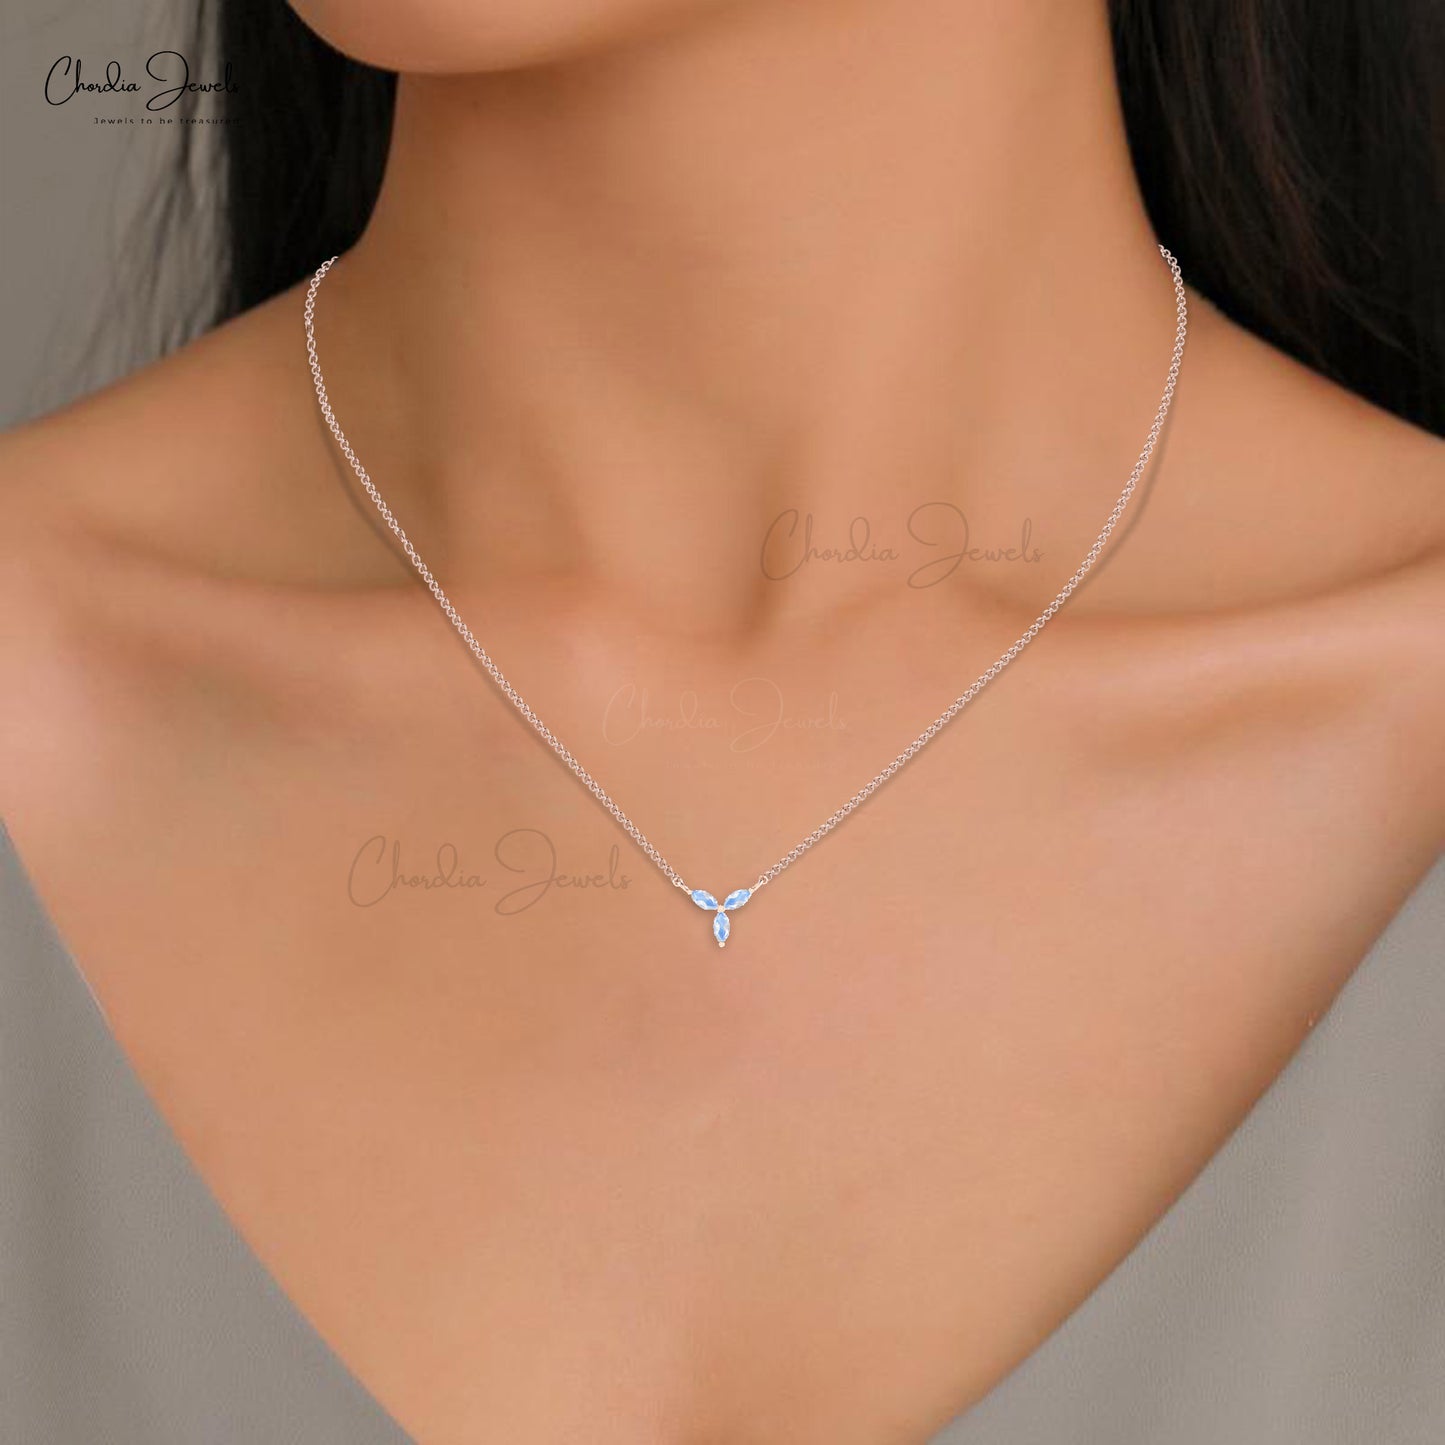 Minimalist Marquise Shape Natural Gemstone Necklace Pendant 0.24 Ct Rainbow Moonstone 3-Stone Necklace in 14k Pure Gold Valentine's Day Gift